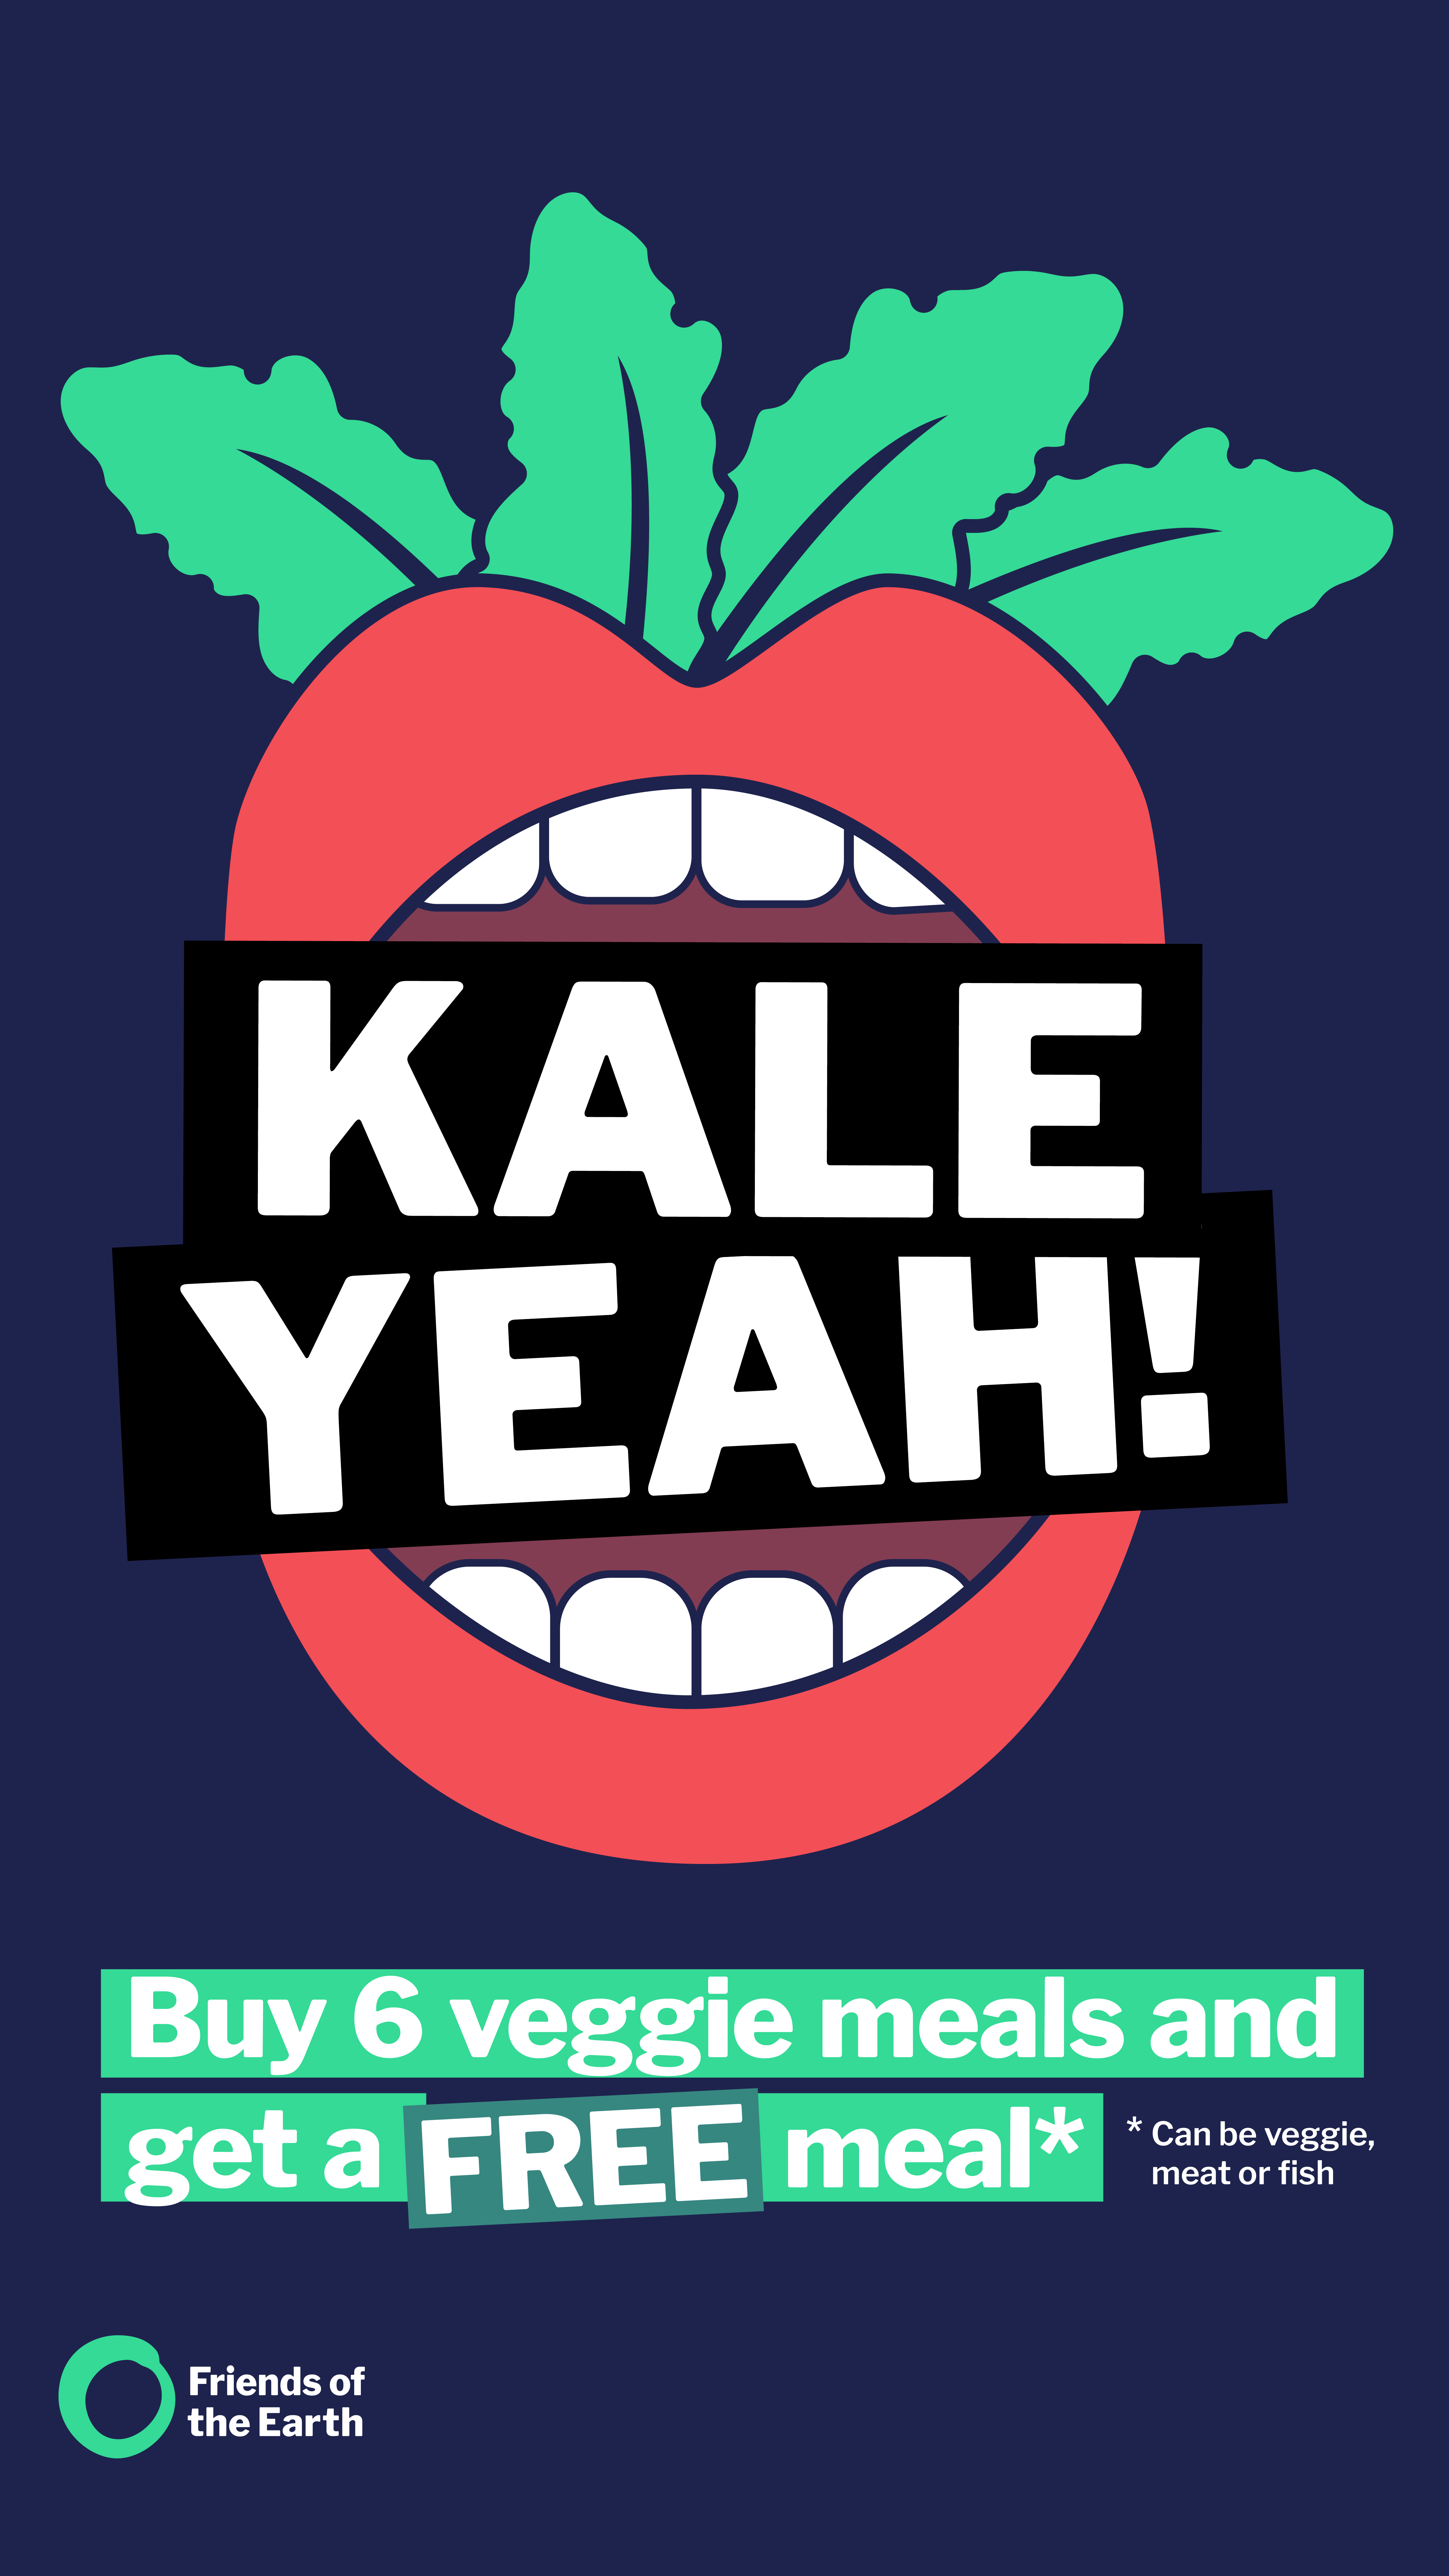 Kale Yeah! logo and text explaining how the loyalty scheme works